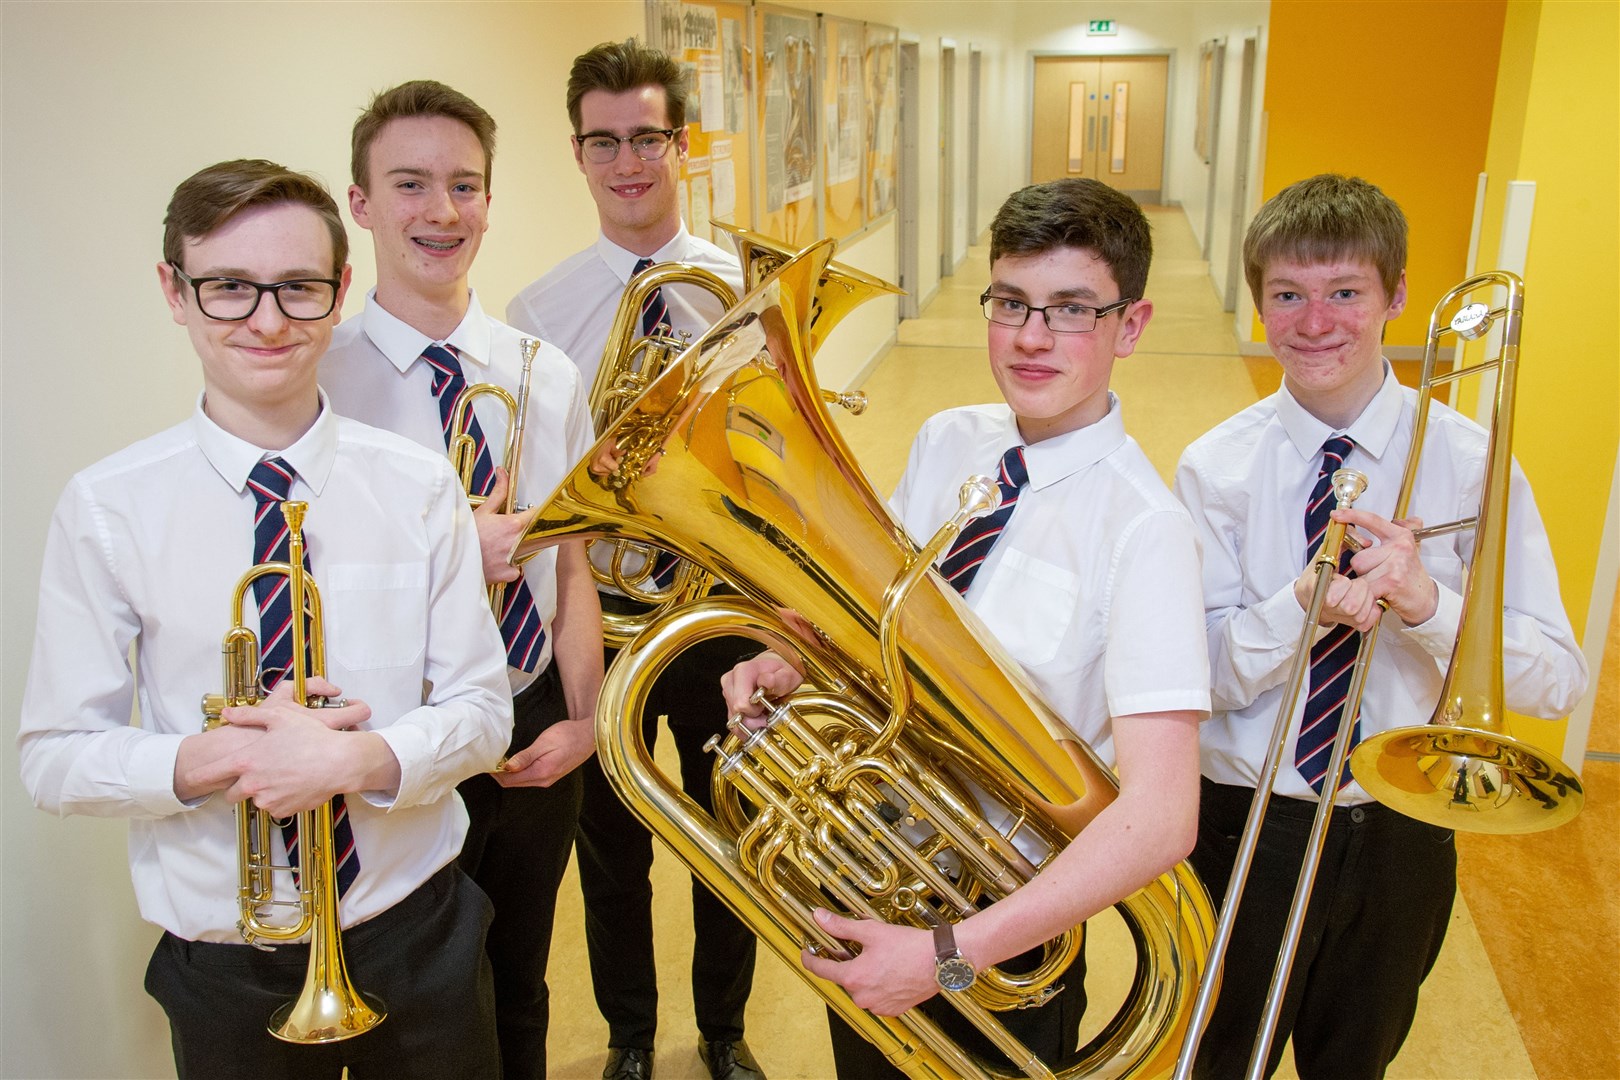 Taking a break from their rehearsals are (from left) Alex Hadfield, Blair Jackson, Oliver Stalker, Jacob Holder and Euan Adams.